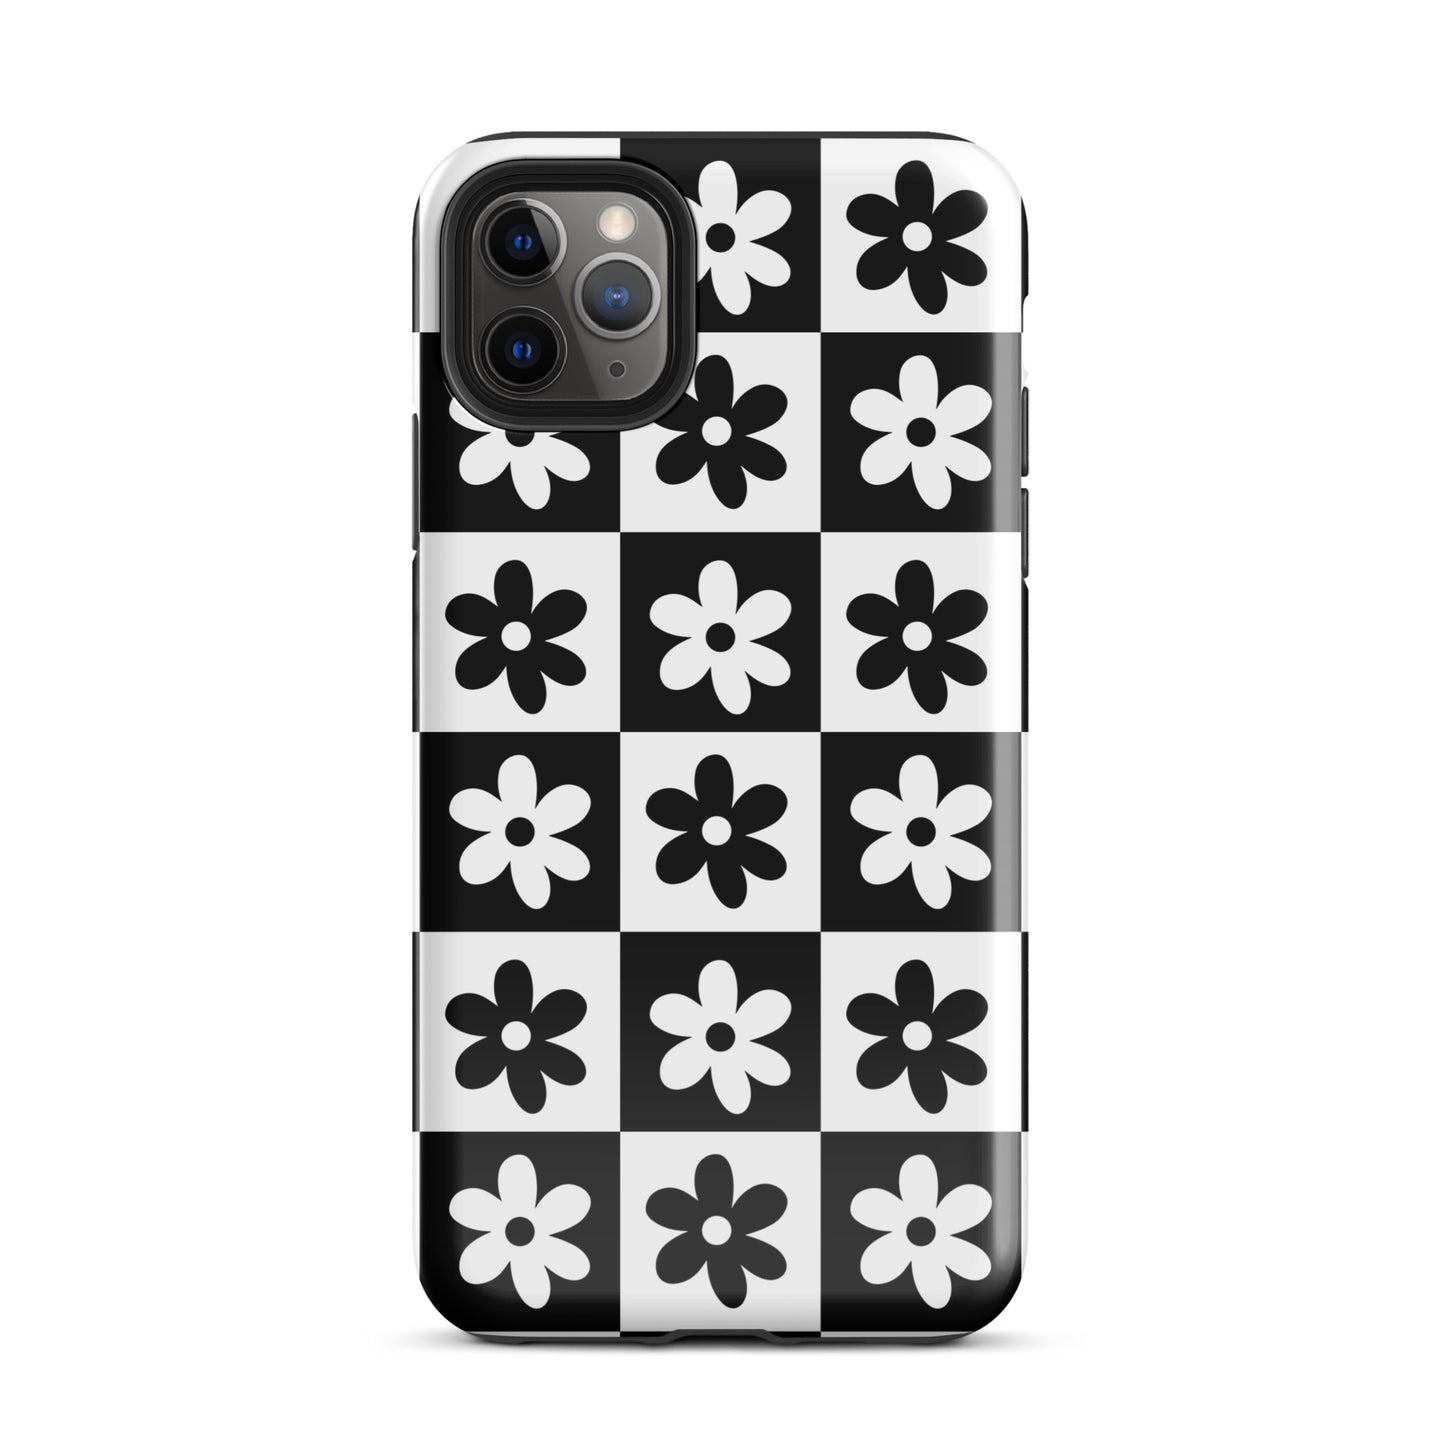 Black & White Garden iPhone Case iPhone 11 Pro Max Glossy